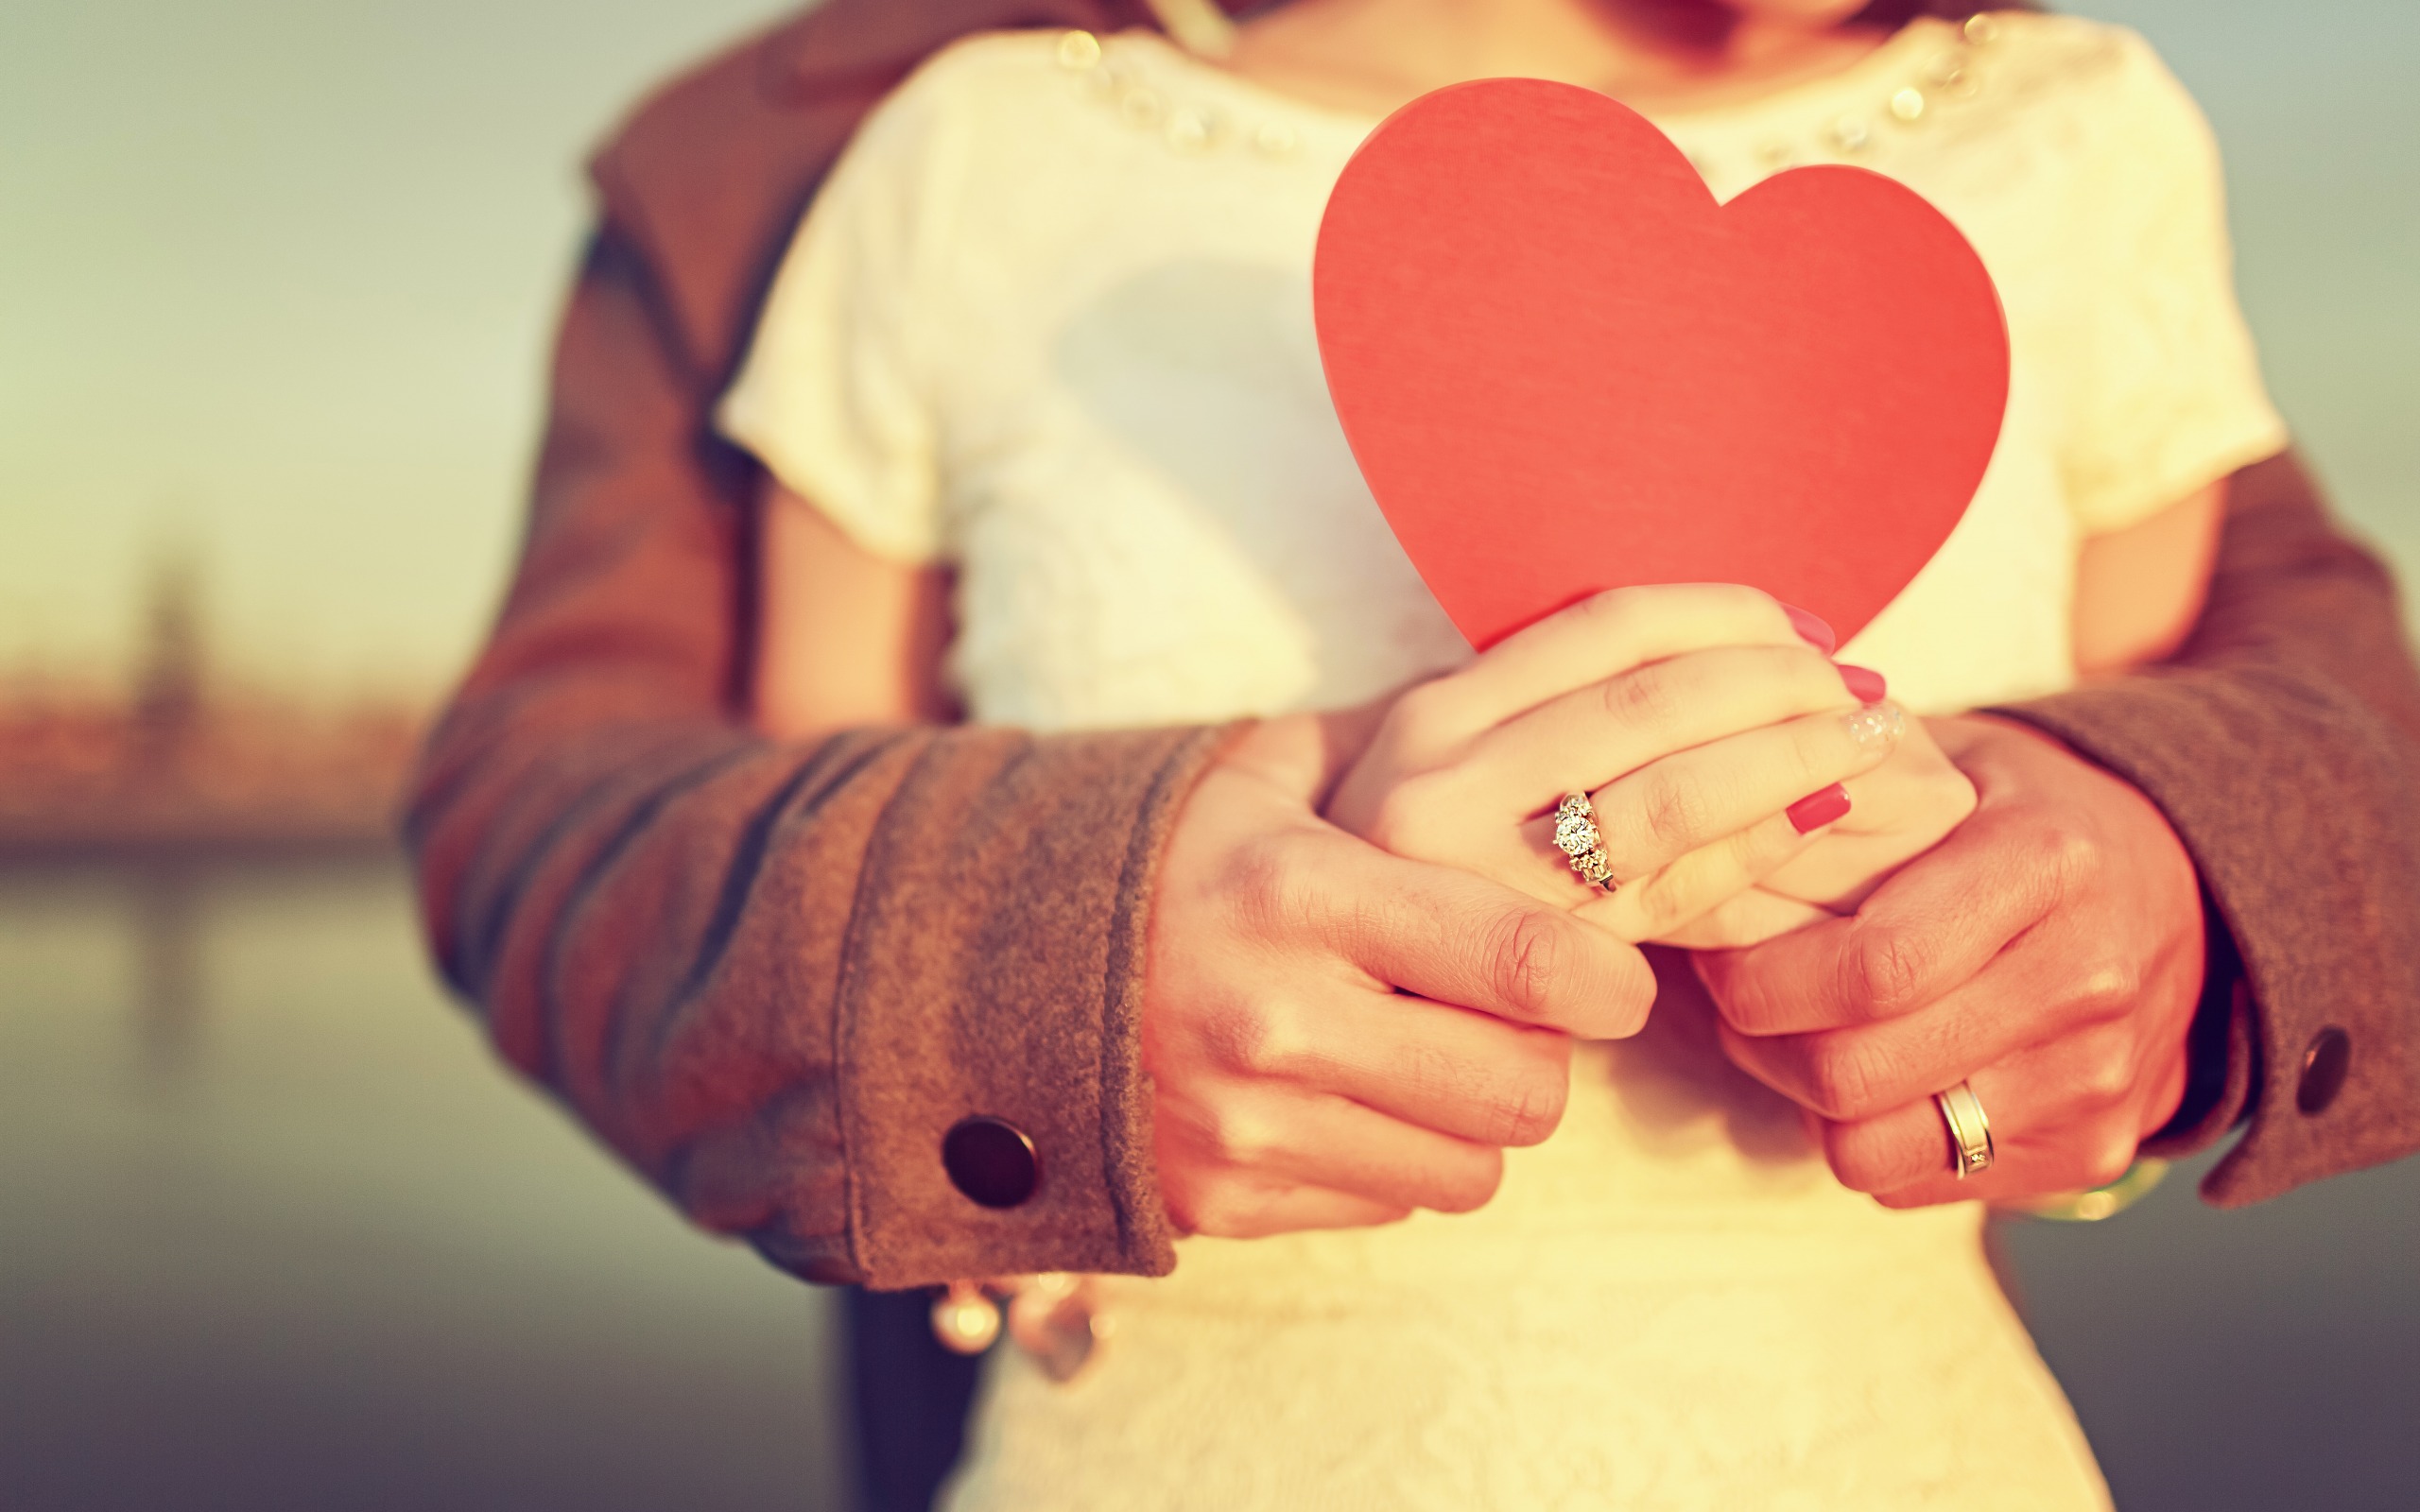 Loving Couple, Engagement Ring, Red Heart, Romance, - Love Relationship Pics Hd - HD Wallpaper 